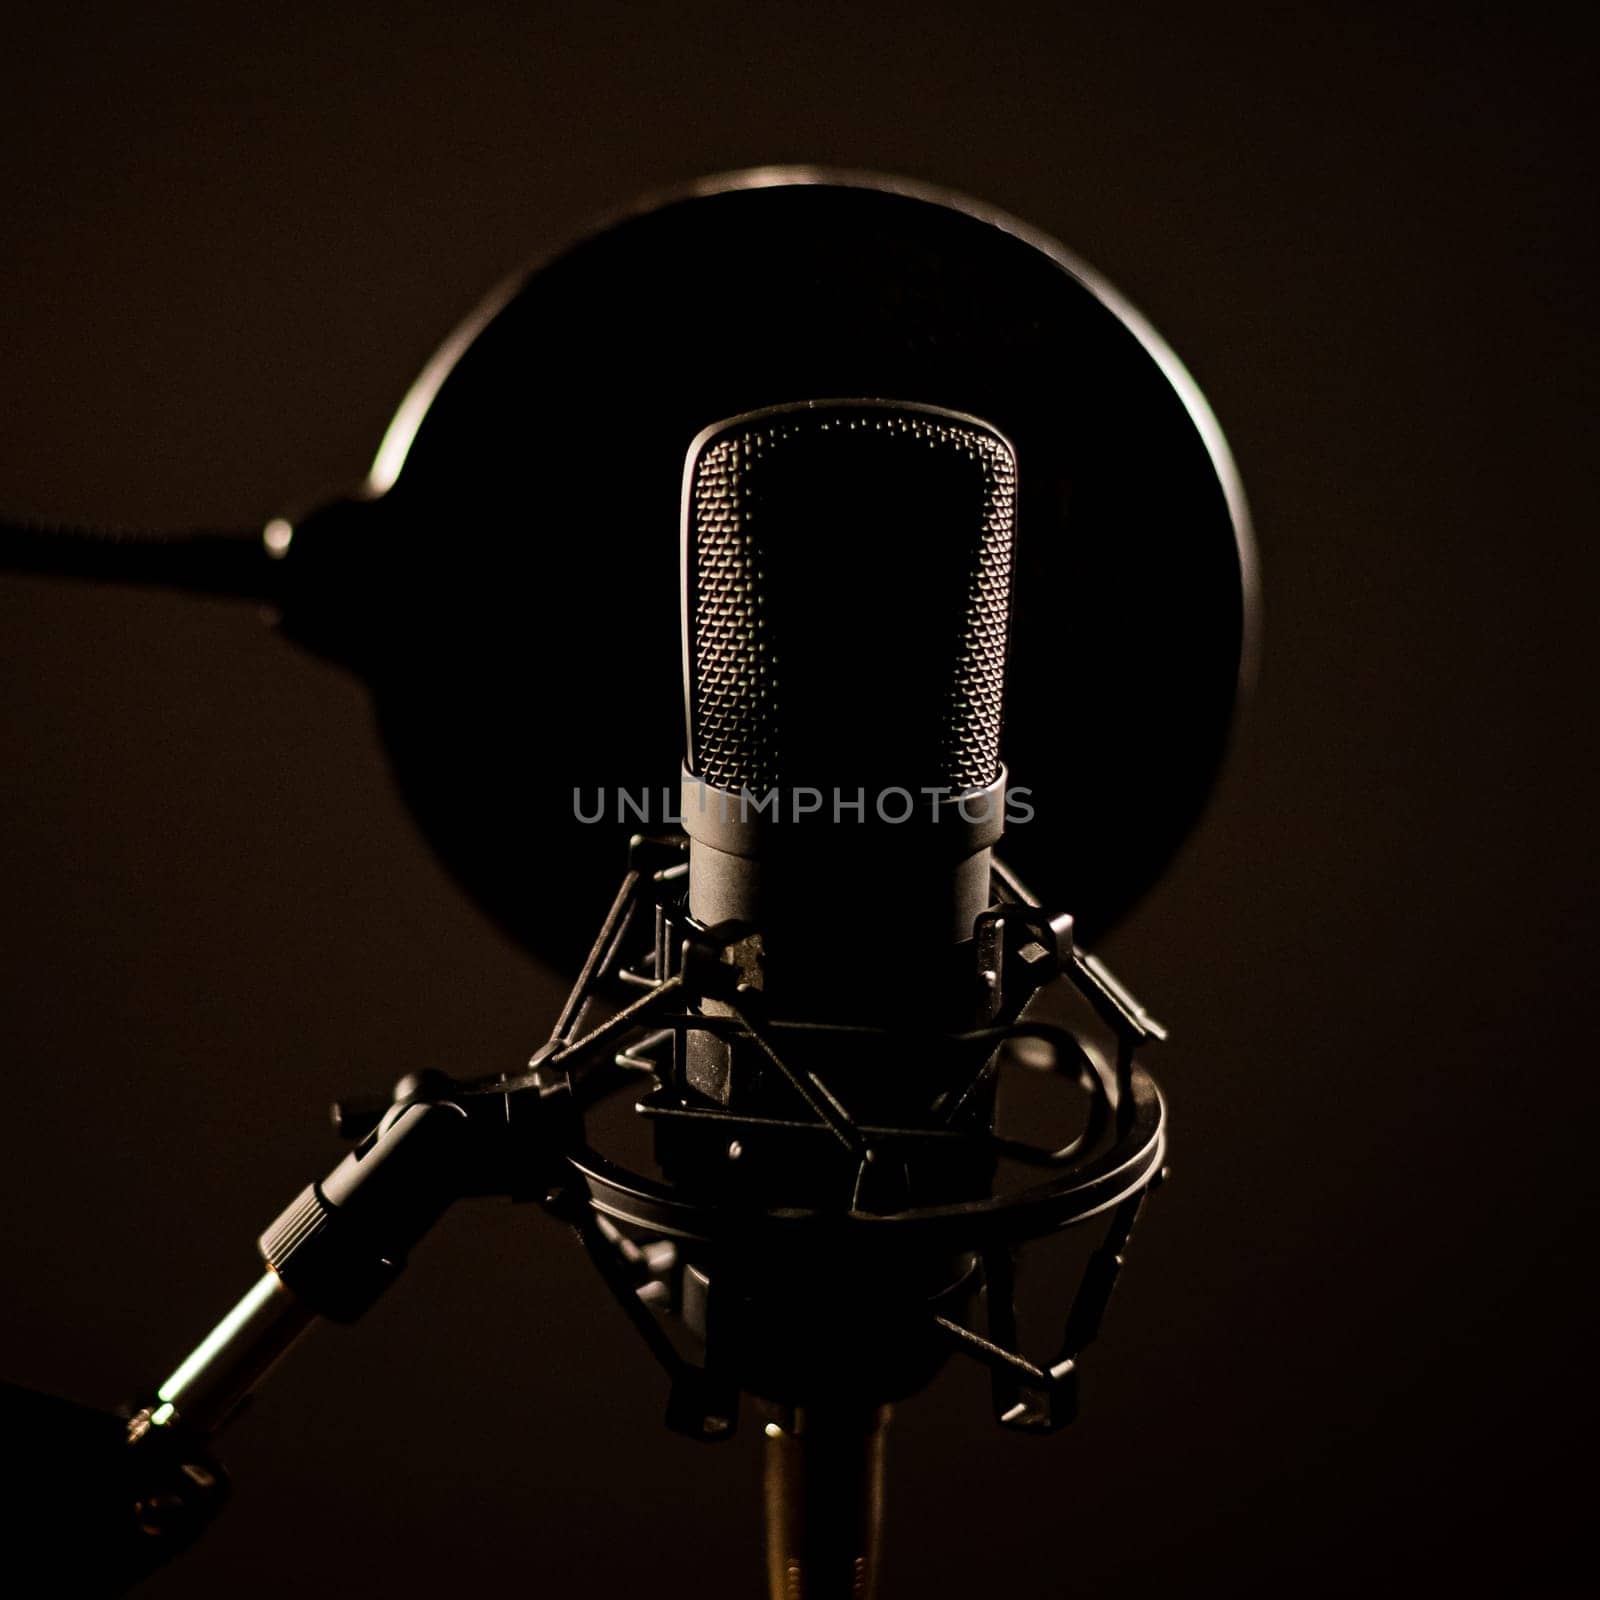 Professional microphone on a dark background by mrwed54